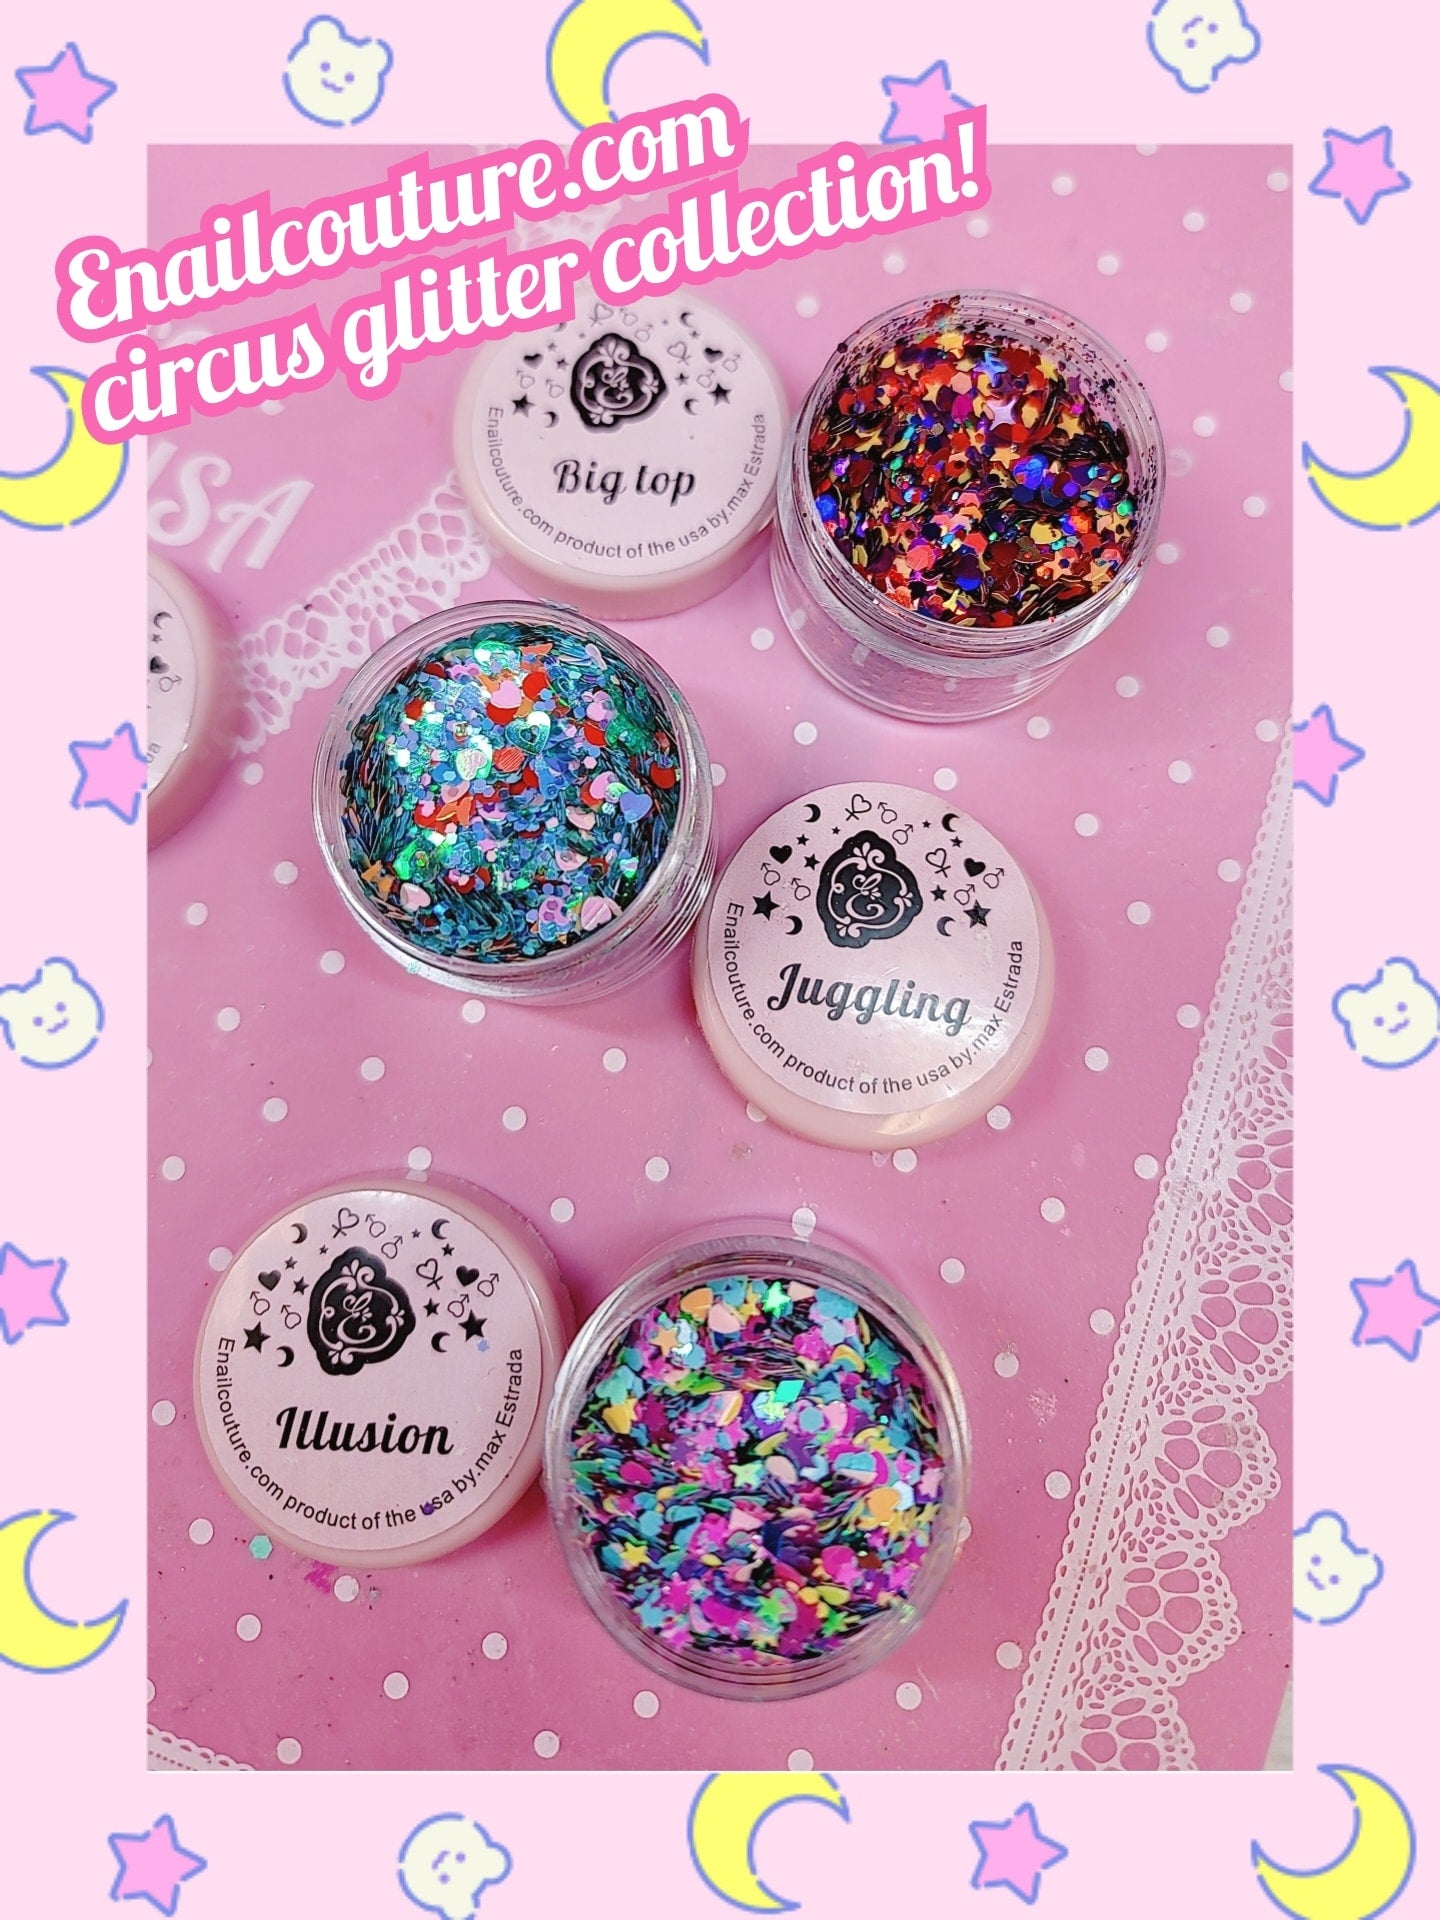 Circus Glitter Series (Holographic Nail Art Glitters Shinning Sugar Effect Nail Powders Laser Candy Color Nail Art Supplies Flakes Dipping Dust Colorful Nail Decor Glitter Sequins Designs Manicure Tips Accessories )